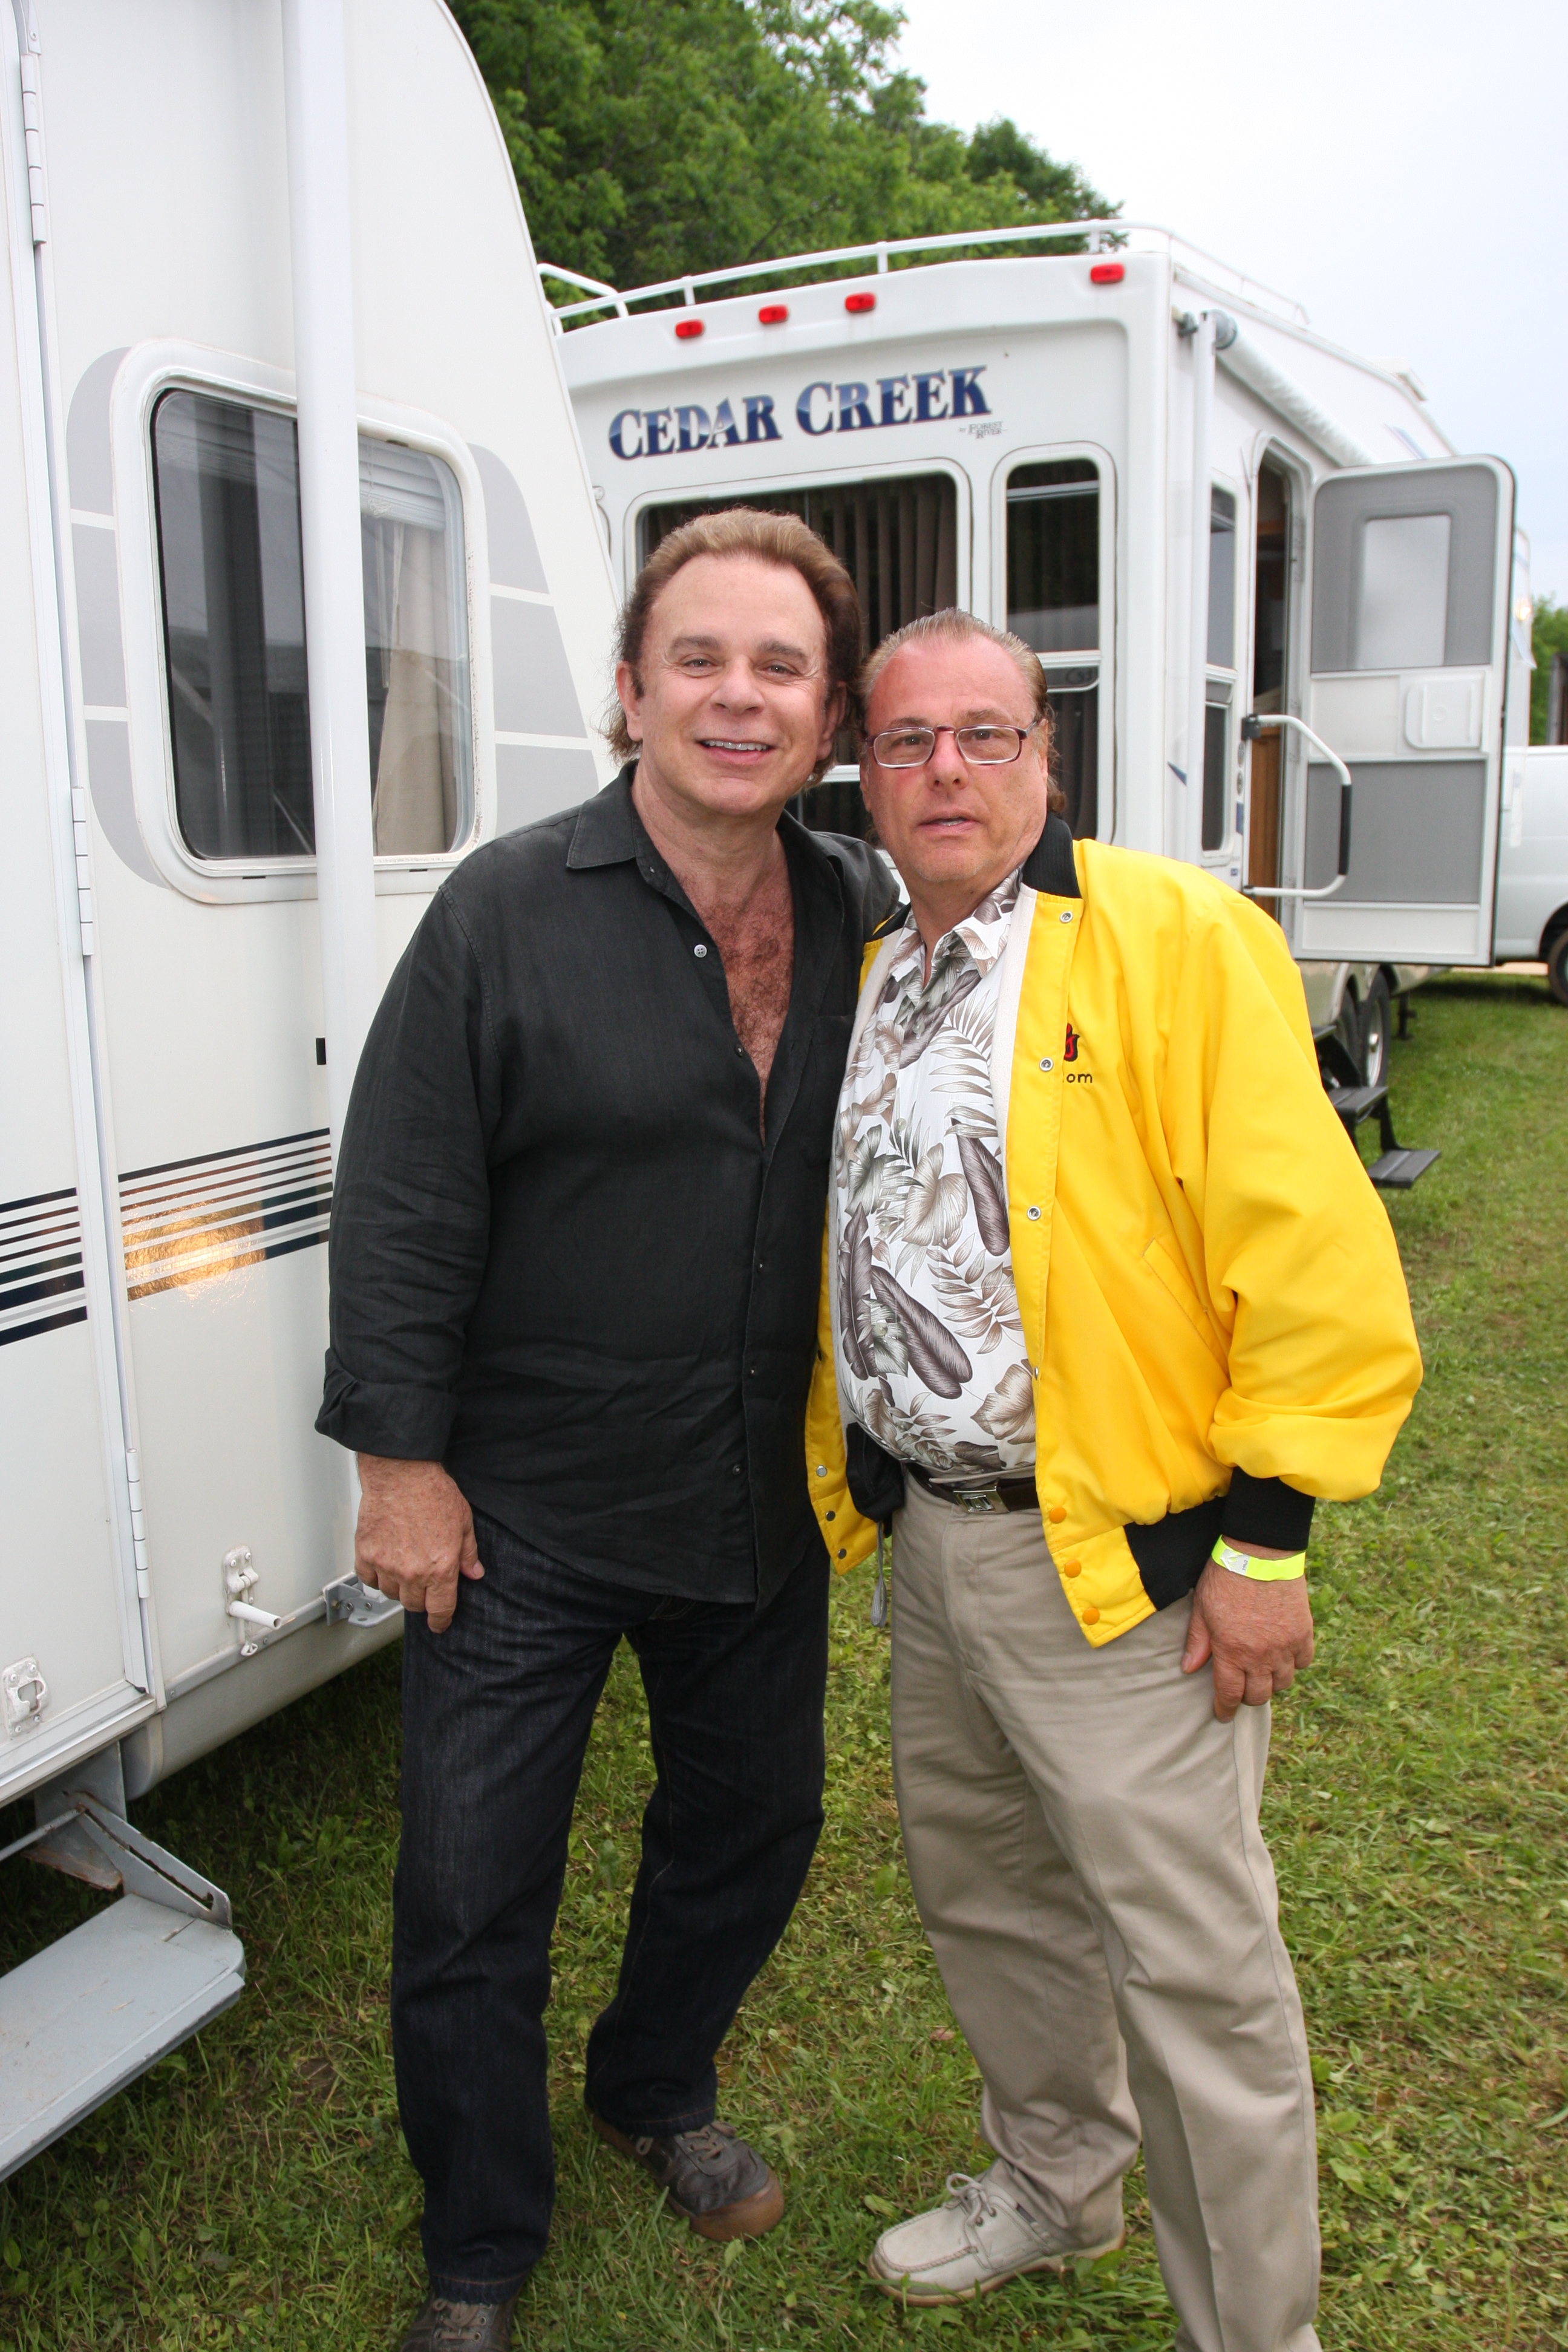 Lou Christie and I at a show